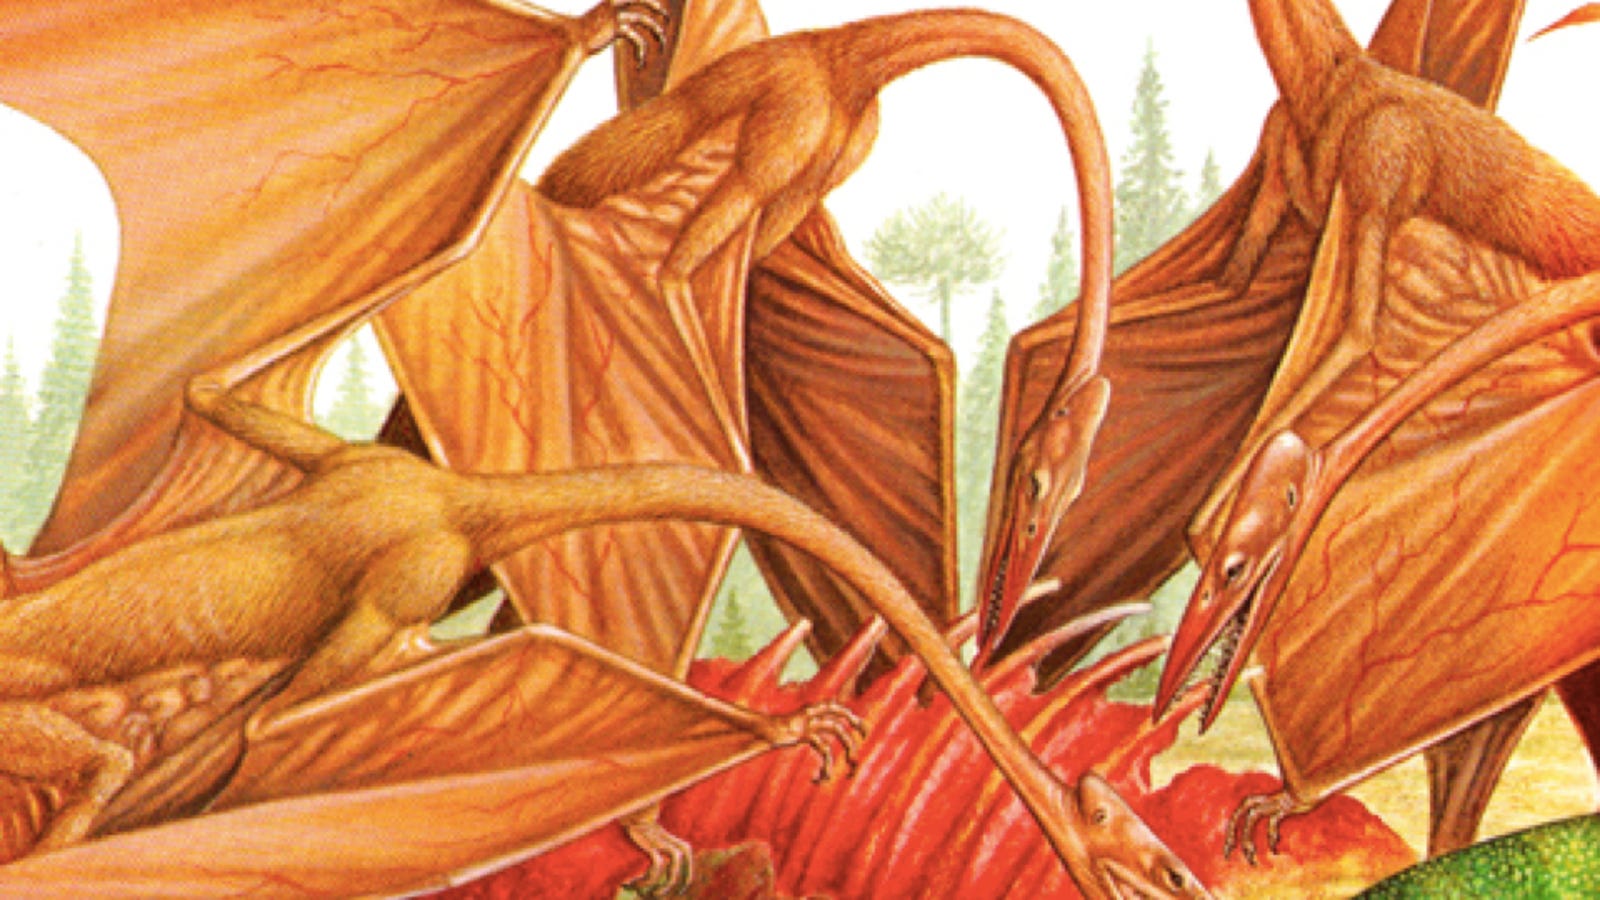 This is one of the scariest (and wrongest) pterosaur pictures ever